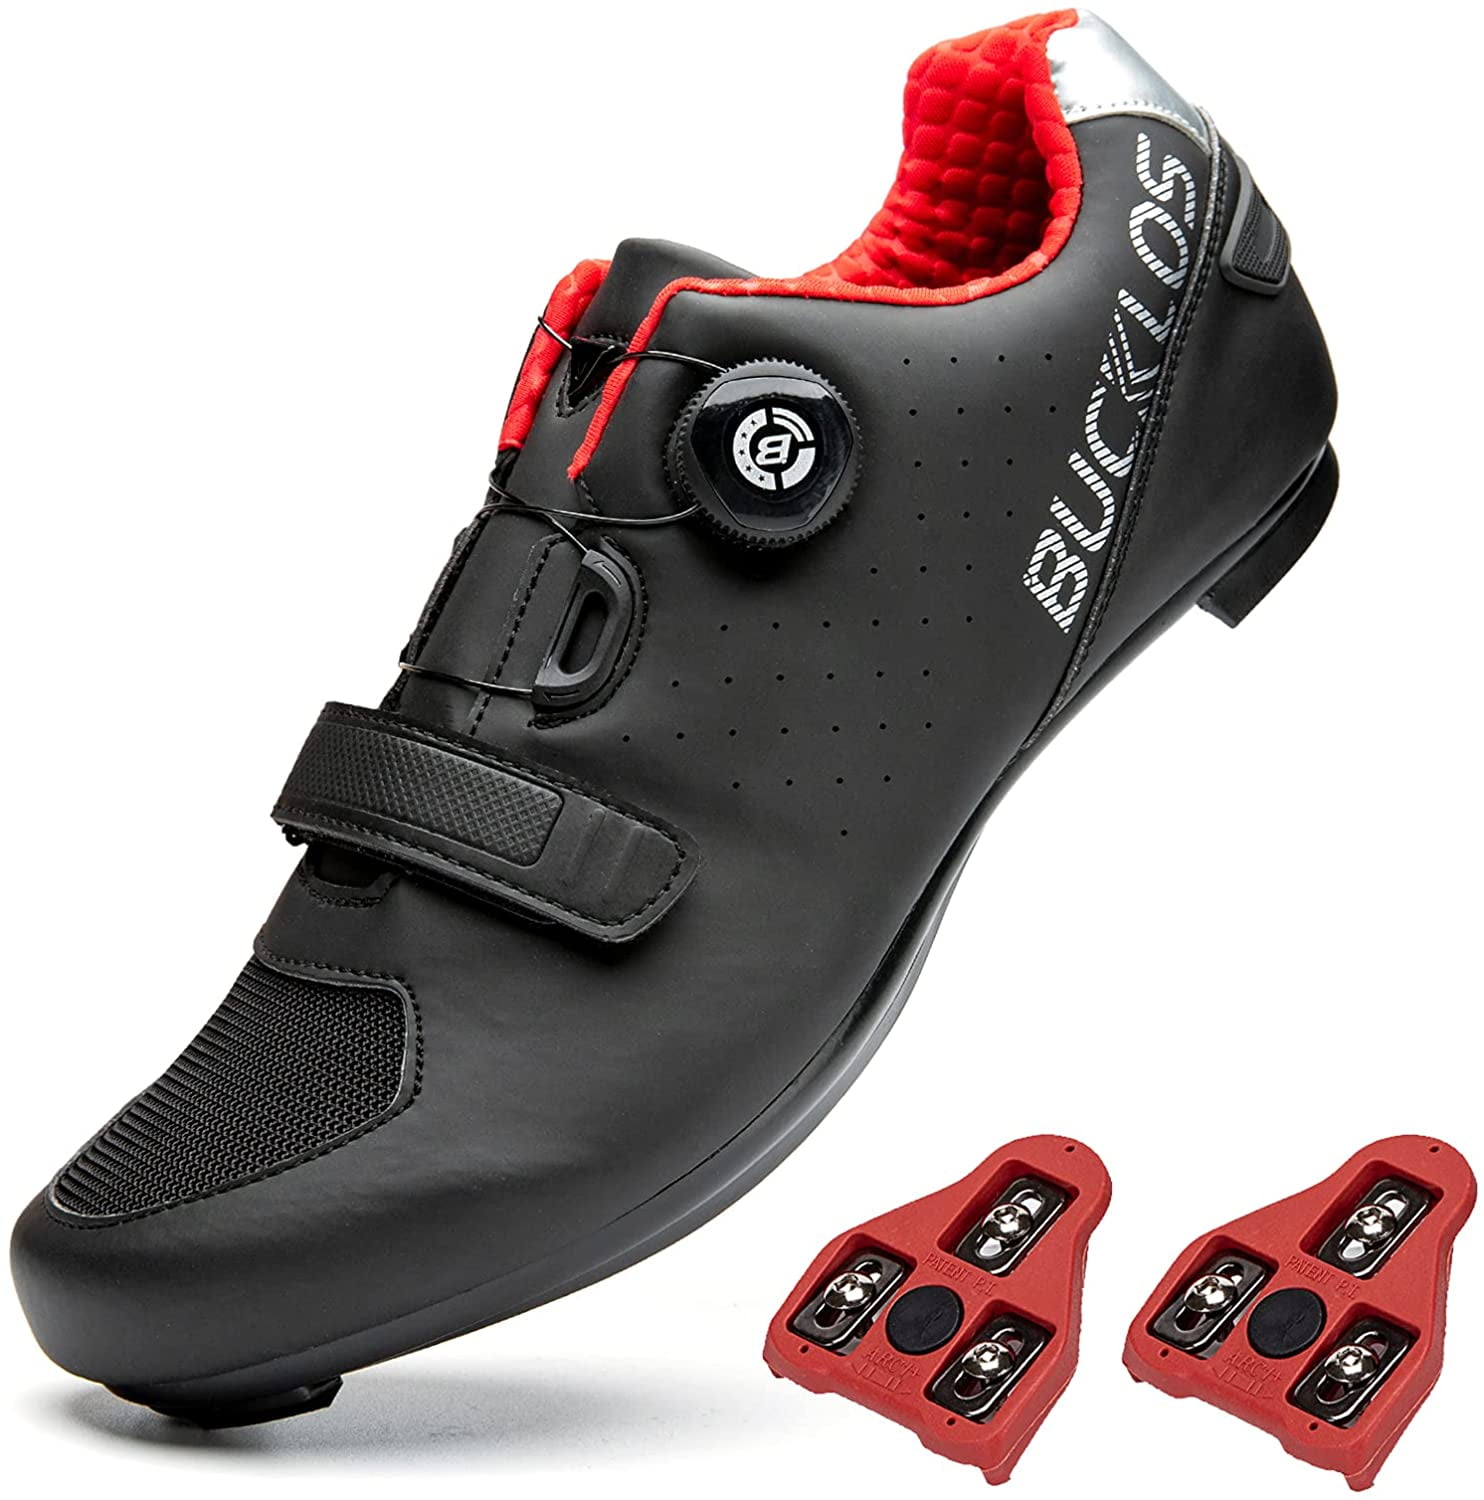 Details about   Outdoor Cycling Shoes Peloton Shoes Men Ultralight Road SPD Bike Bicycle Sneaker 